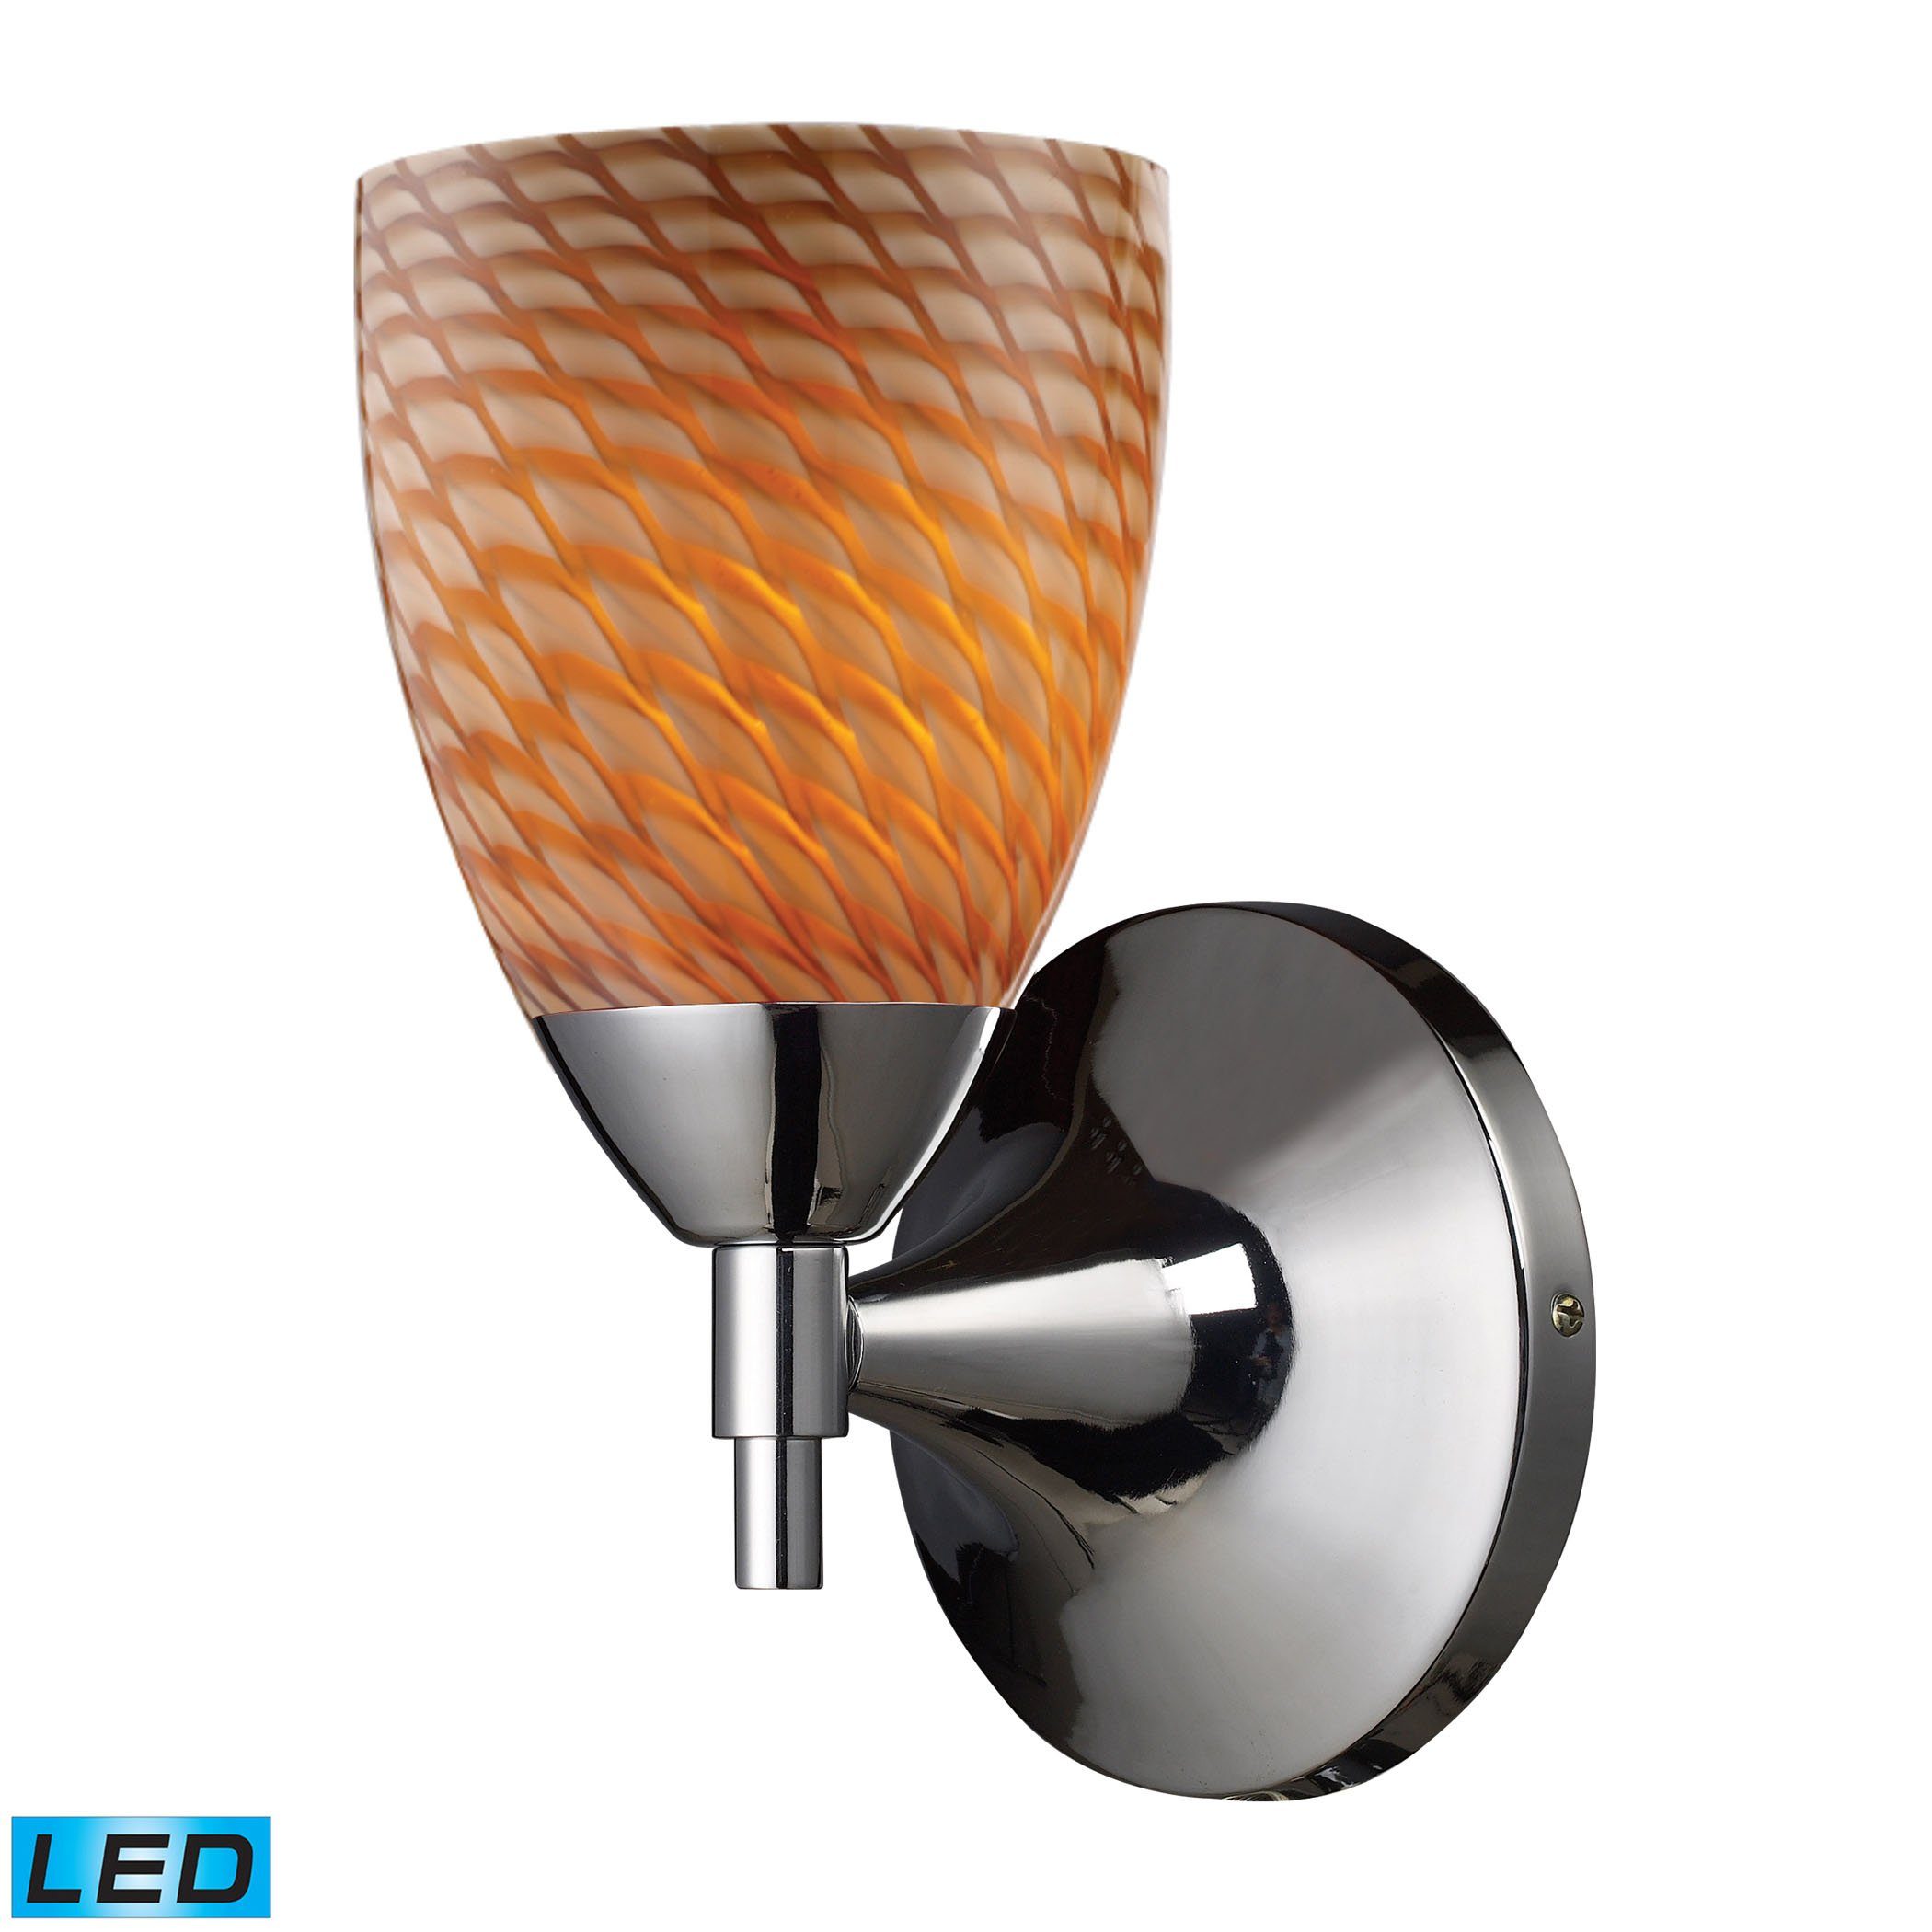 Celina 1 Light LED Sconce In Polished Chrome And Cocoa Glass Wall Sconce Elk Lighting 